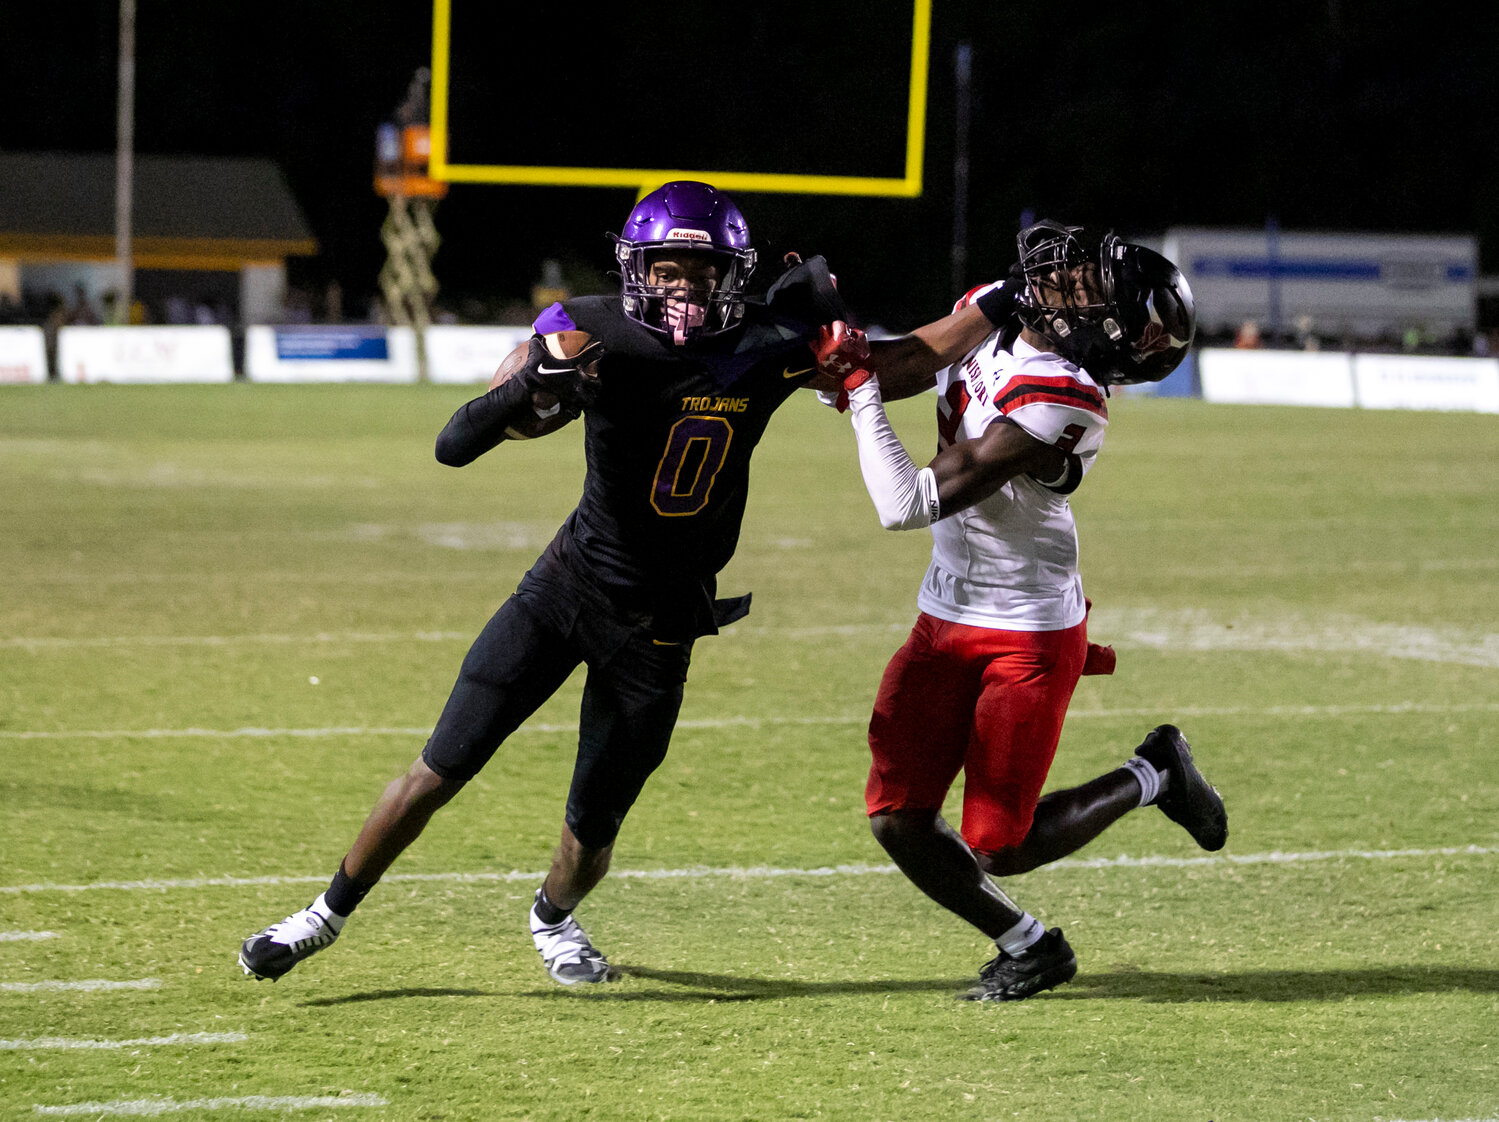 Daphne sophomore CJ Gardner (0) delivers a stiff arm at the end of his run after a catch in the first half of Friday’s rivalry game against the Spanish Fort Toros at Jubilee Stadium. The Trojans scored on all four of their first-half possessions in their first game using all-black alternate uniforms.